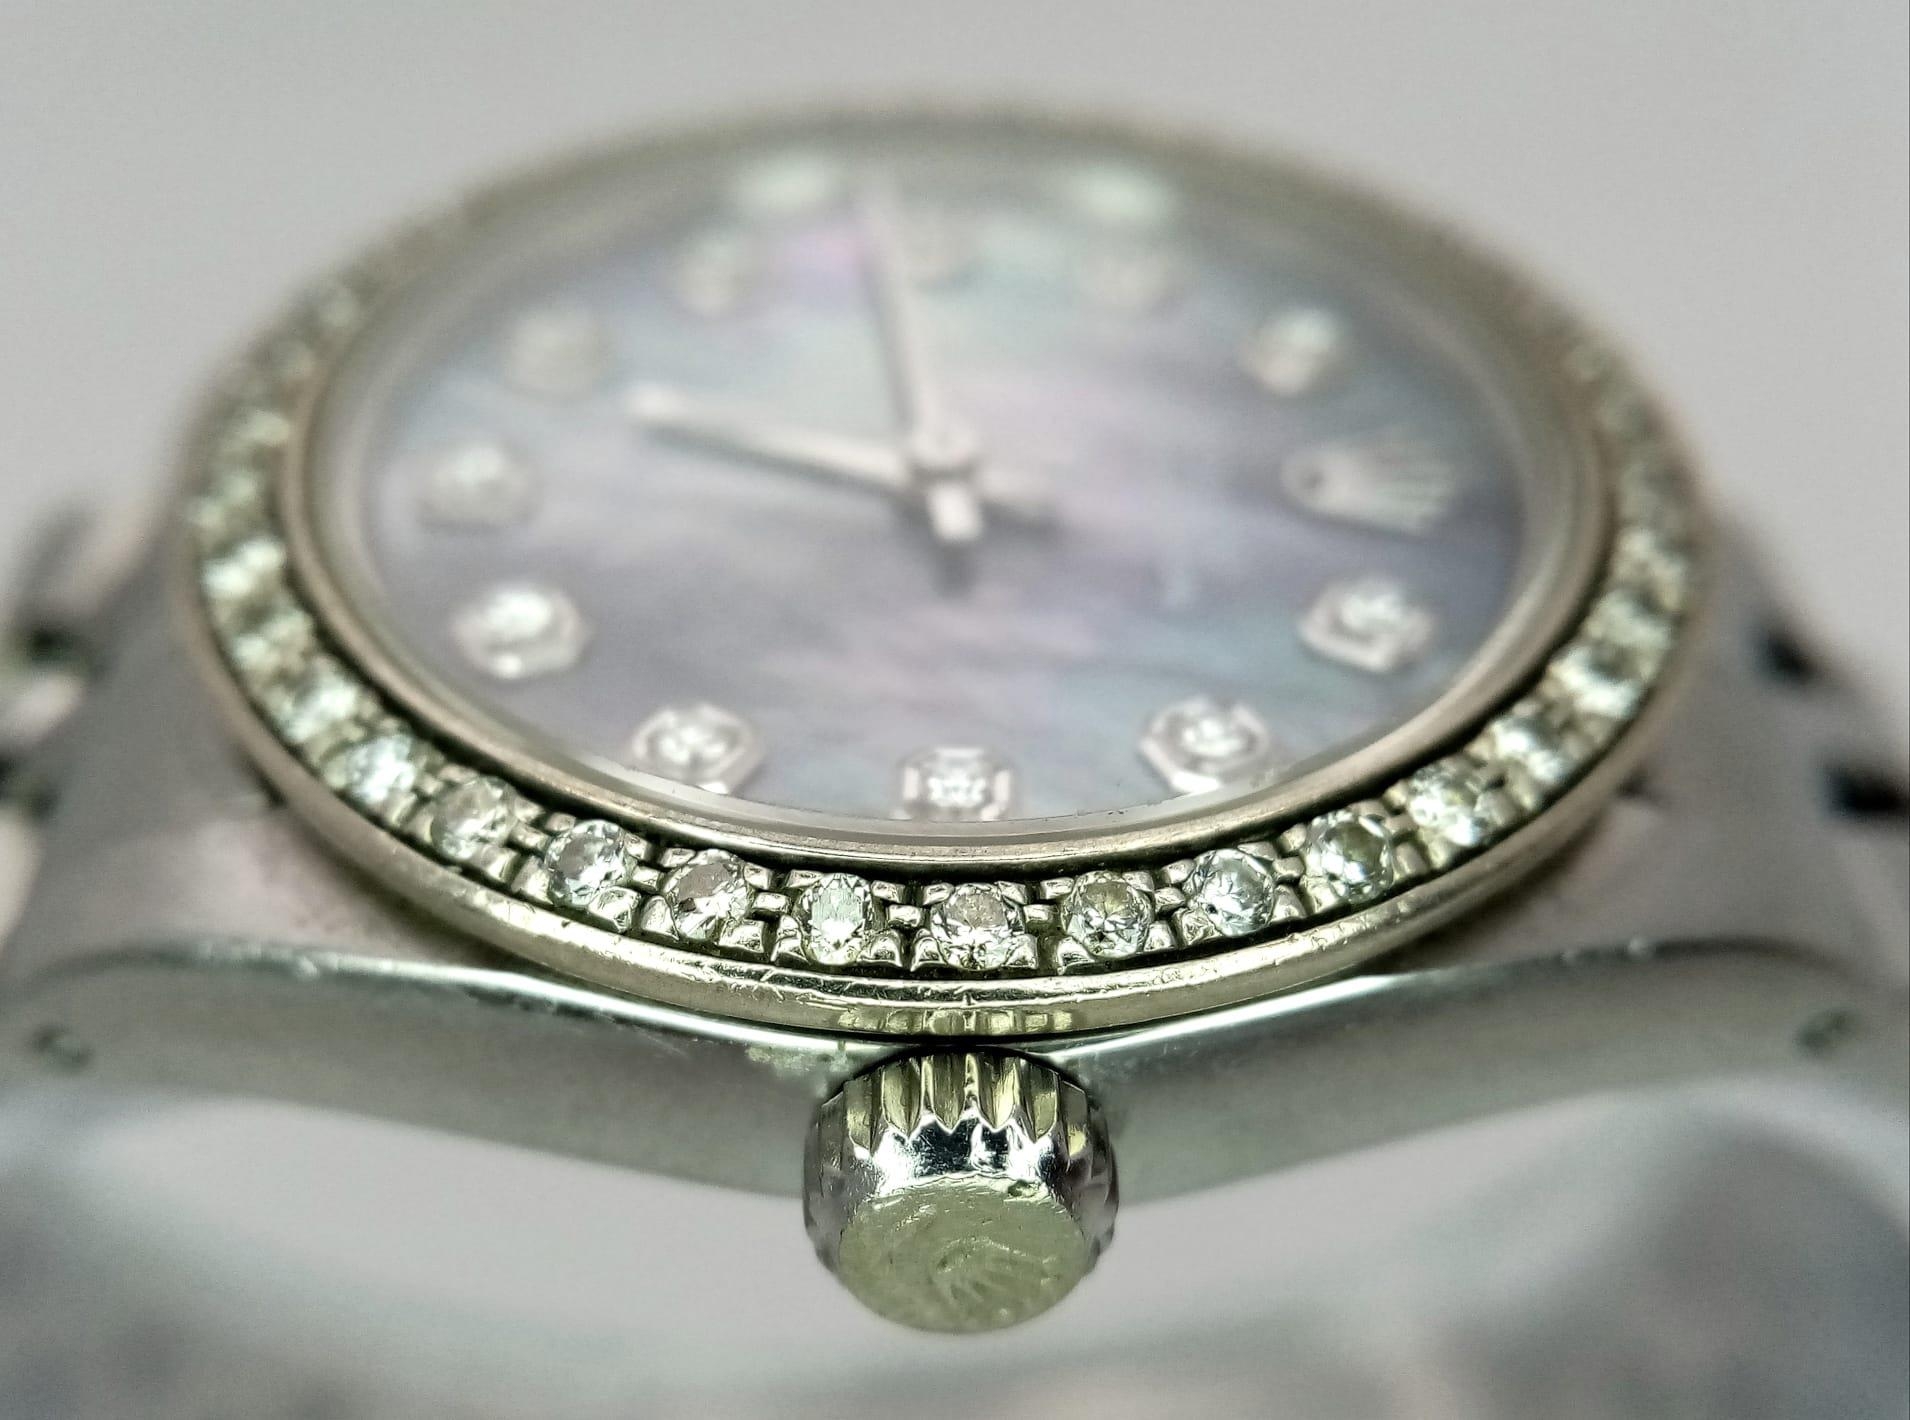 A LADIES ROLEX DRESS WATCH WITH DIAMOND NUMERALS AND BEZEL , MOTHER OF PEARL DIAL AND AUTOMATIC - Image 5 of 10